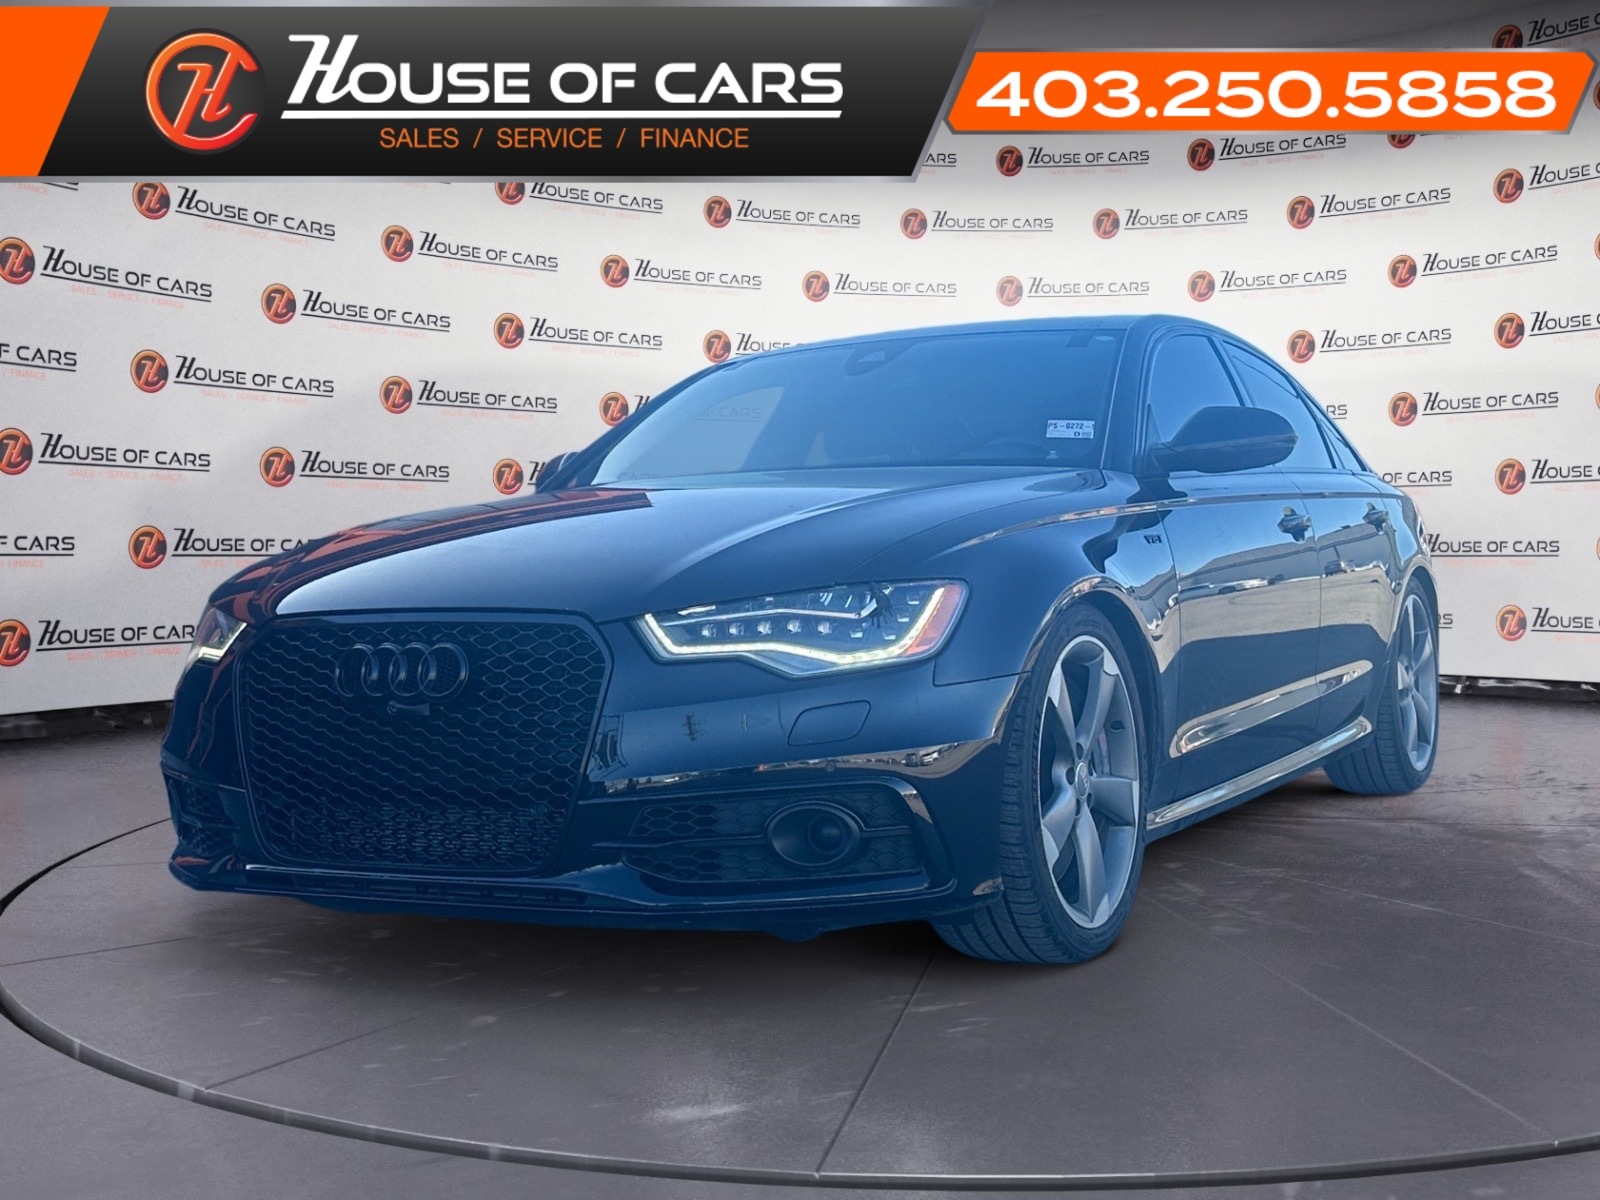 2014 Audi S6 4dr Sdn WITH/ HEATED SEATS AND STEERING